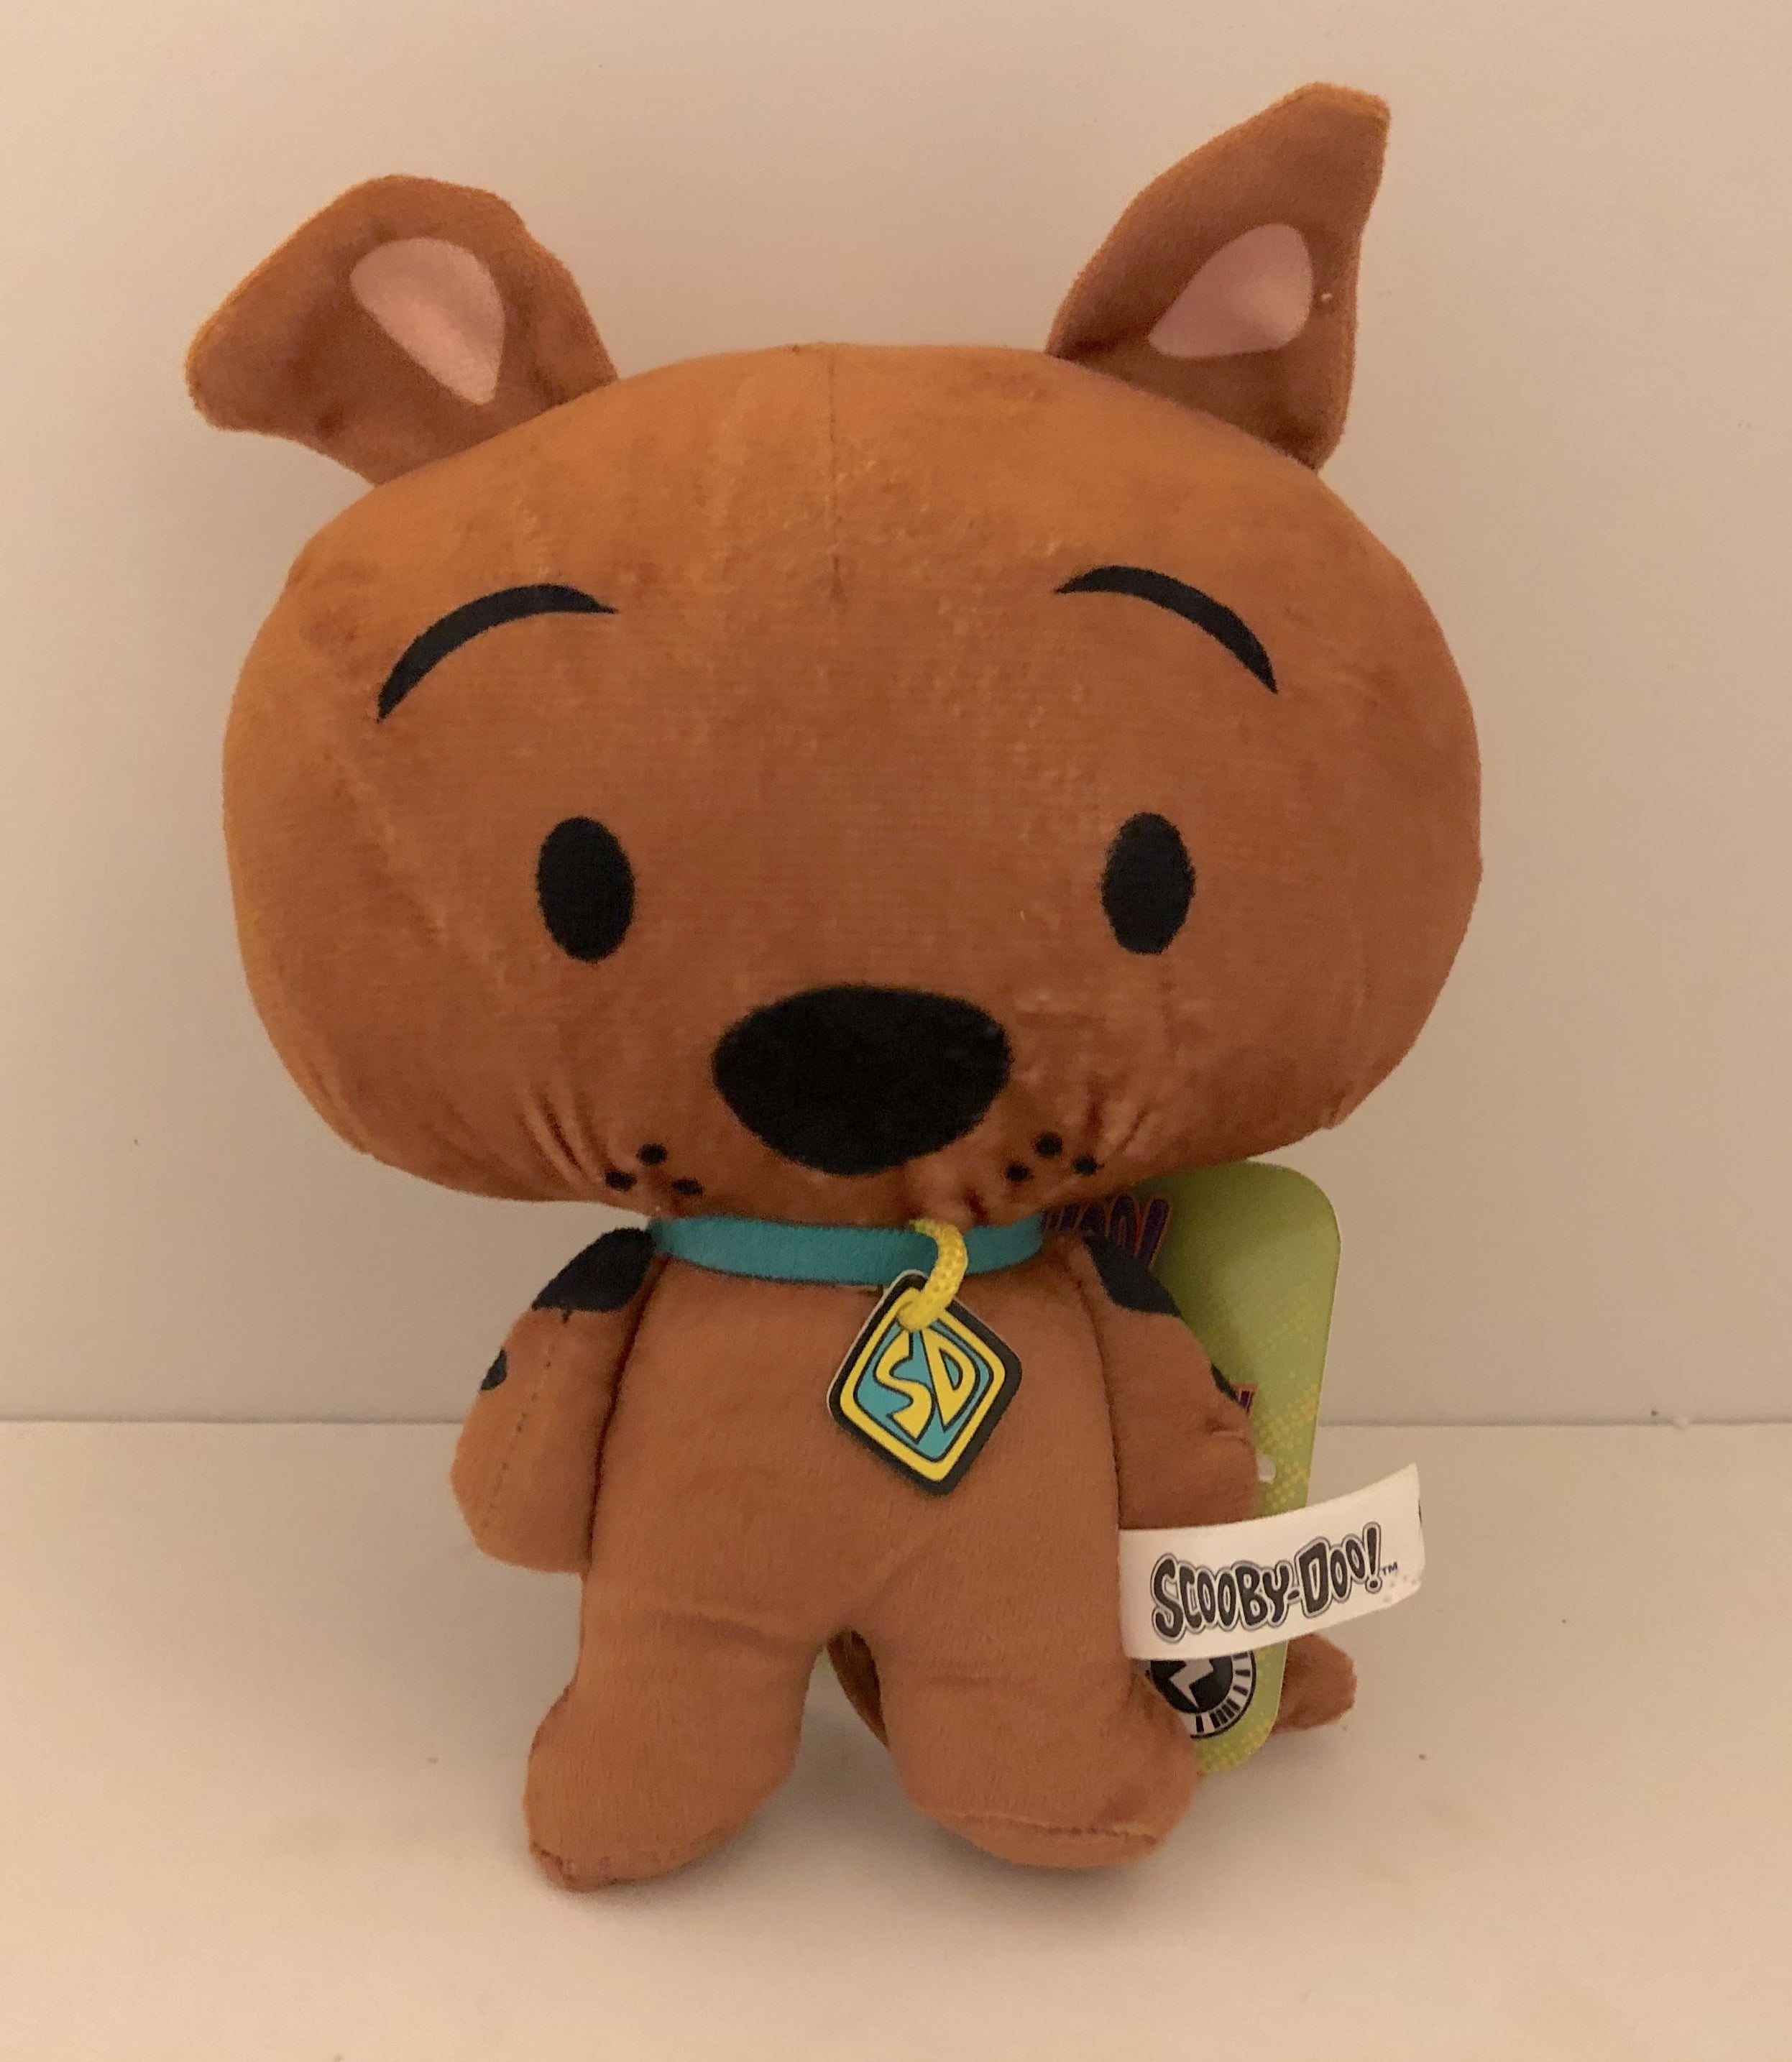 Scooby-doo Chibi Plush 8” Rare Standing Version With Tags Warner Bros Super Cute 